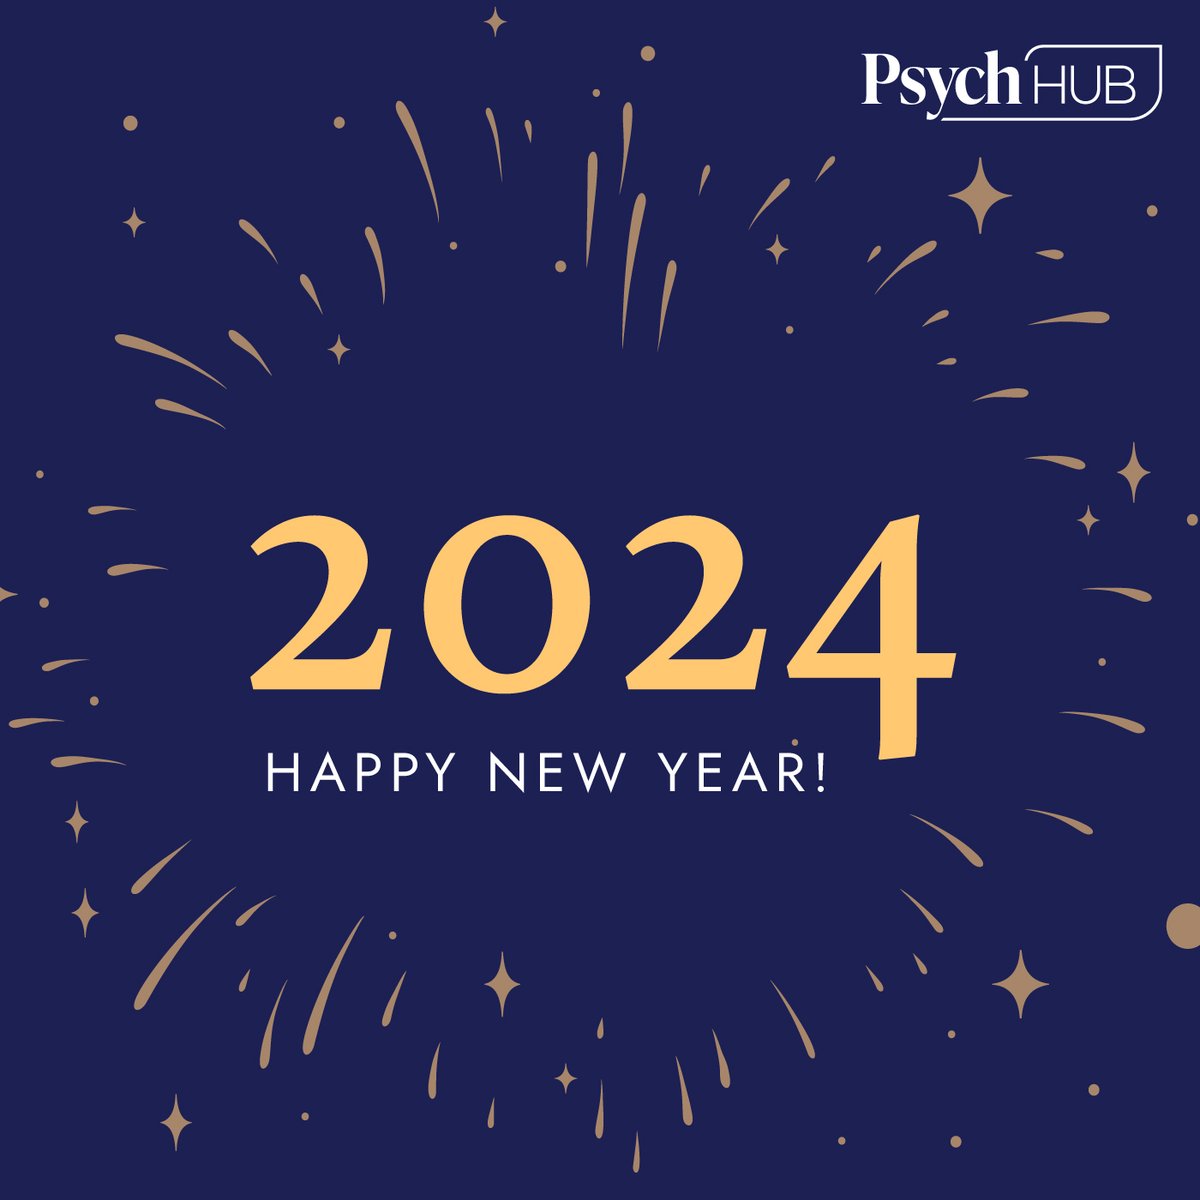 Happy New Year from Psych Hub! 💛